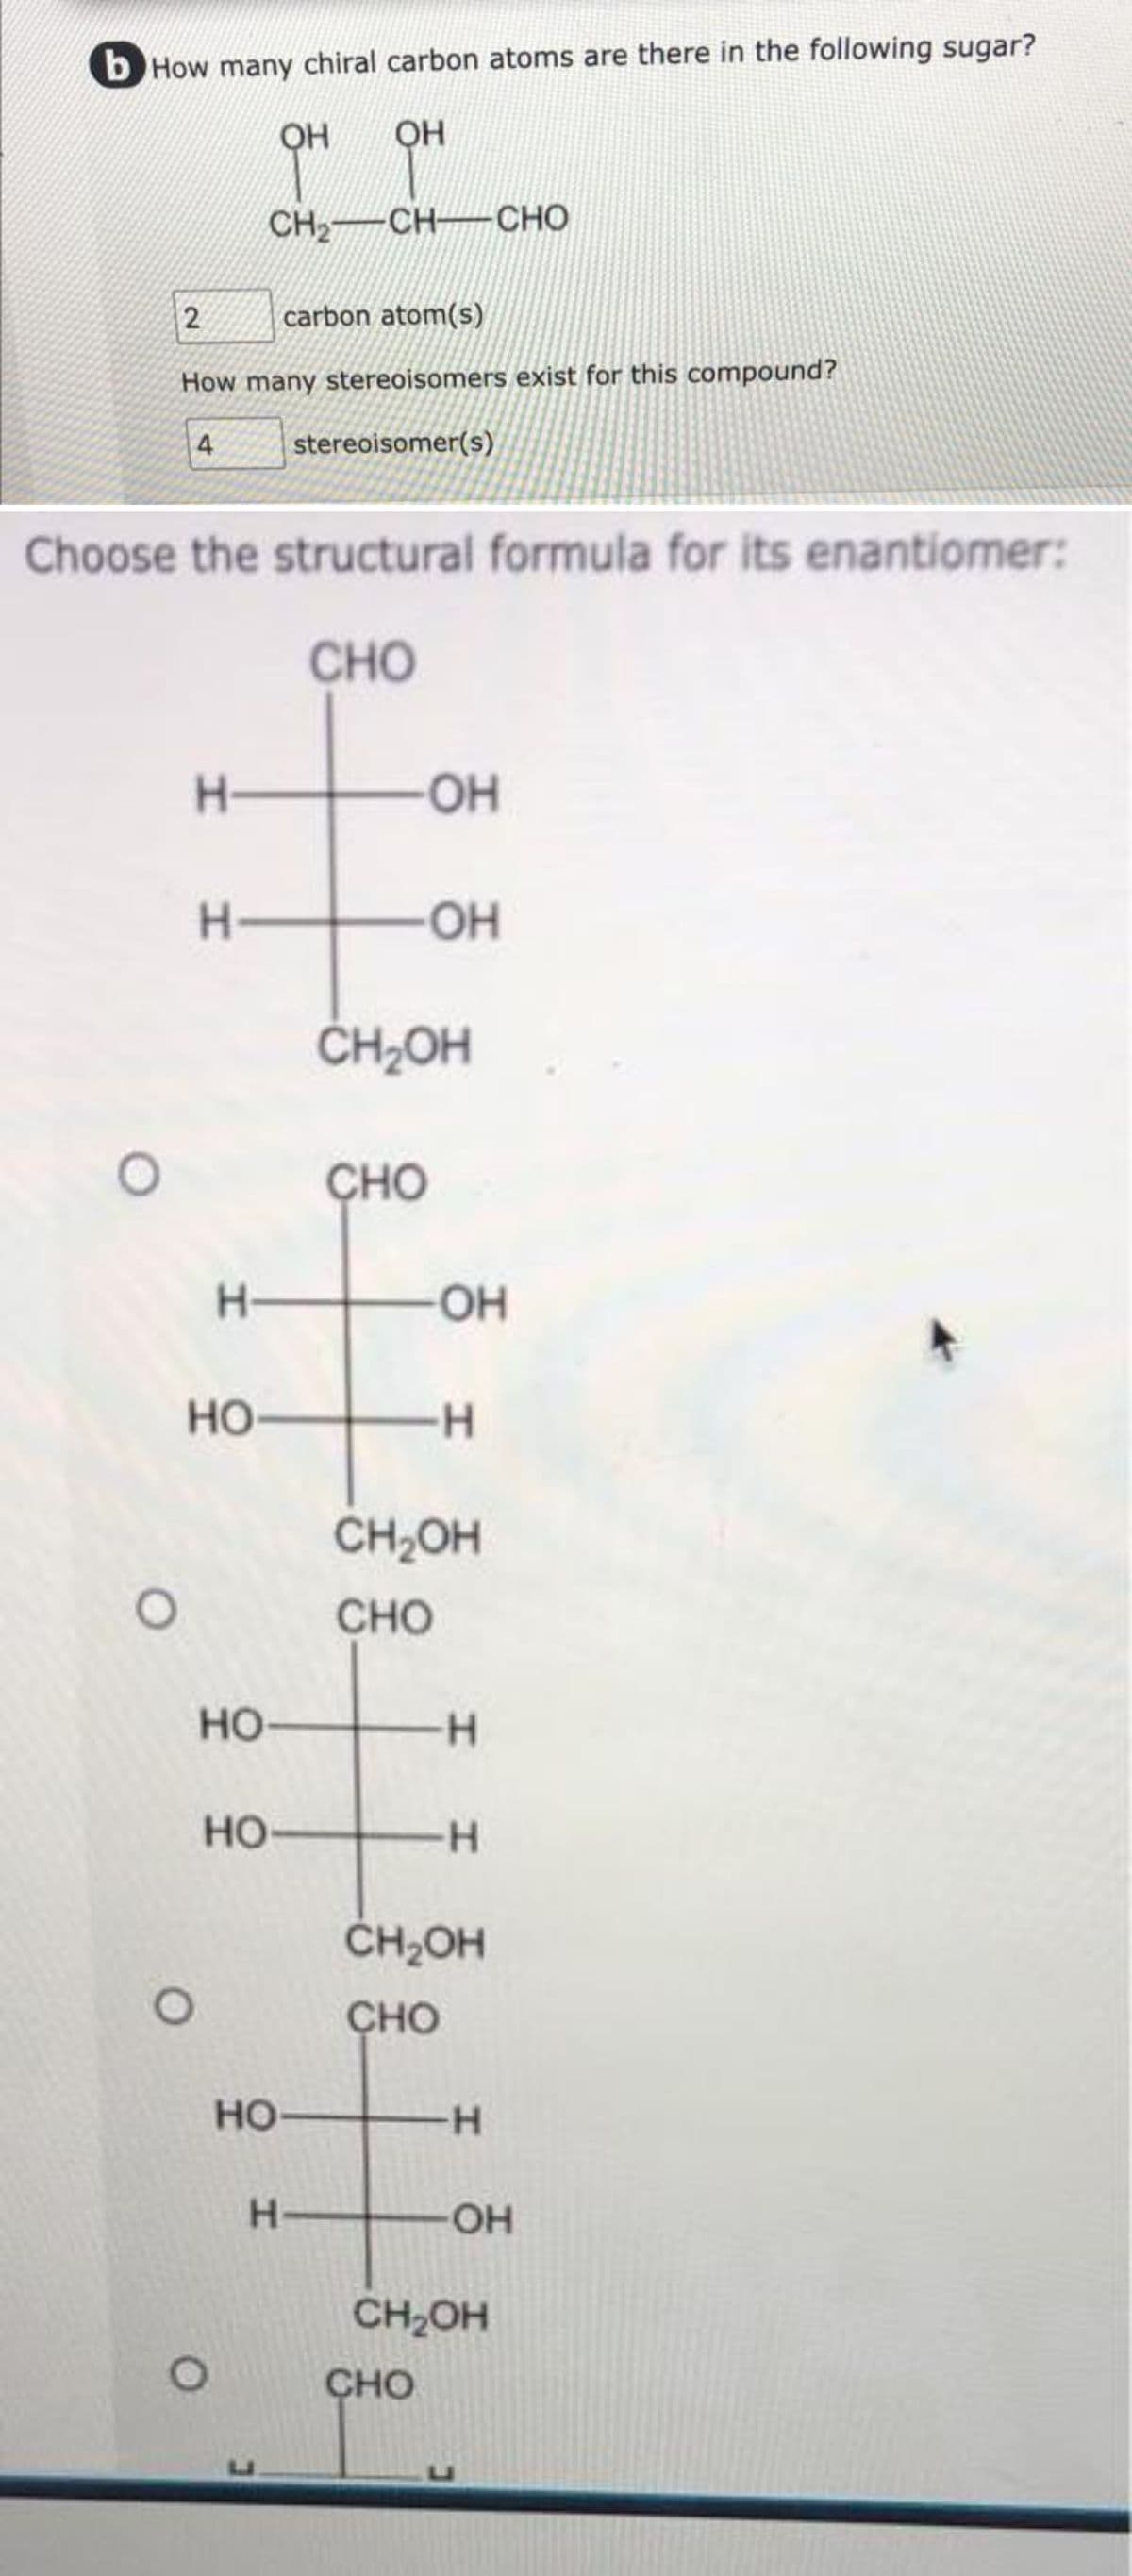 b How many chiral carbon atoms are there in the following sugar?
OH
OH
CH,—CHCHO
O
2
carbon atom(s)
How many stereoisomers exist for this compound?
stereoisomer(s)
Choose the structural formula for its enantiomer:
CHO
O
4
O
H-
H-
HO-
H
HO-
HO
O
HO-
H-
CHO
OH
CH₂OH
OH
OH
CHO
-H
CH₂OH
CHO
H
H
CH₂OH
CHO
-H
-OH
CH₂OH